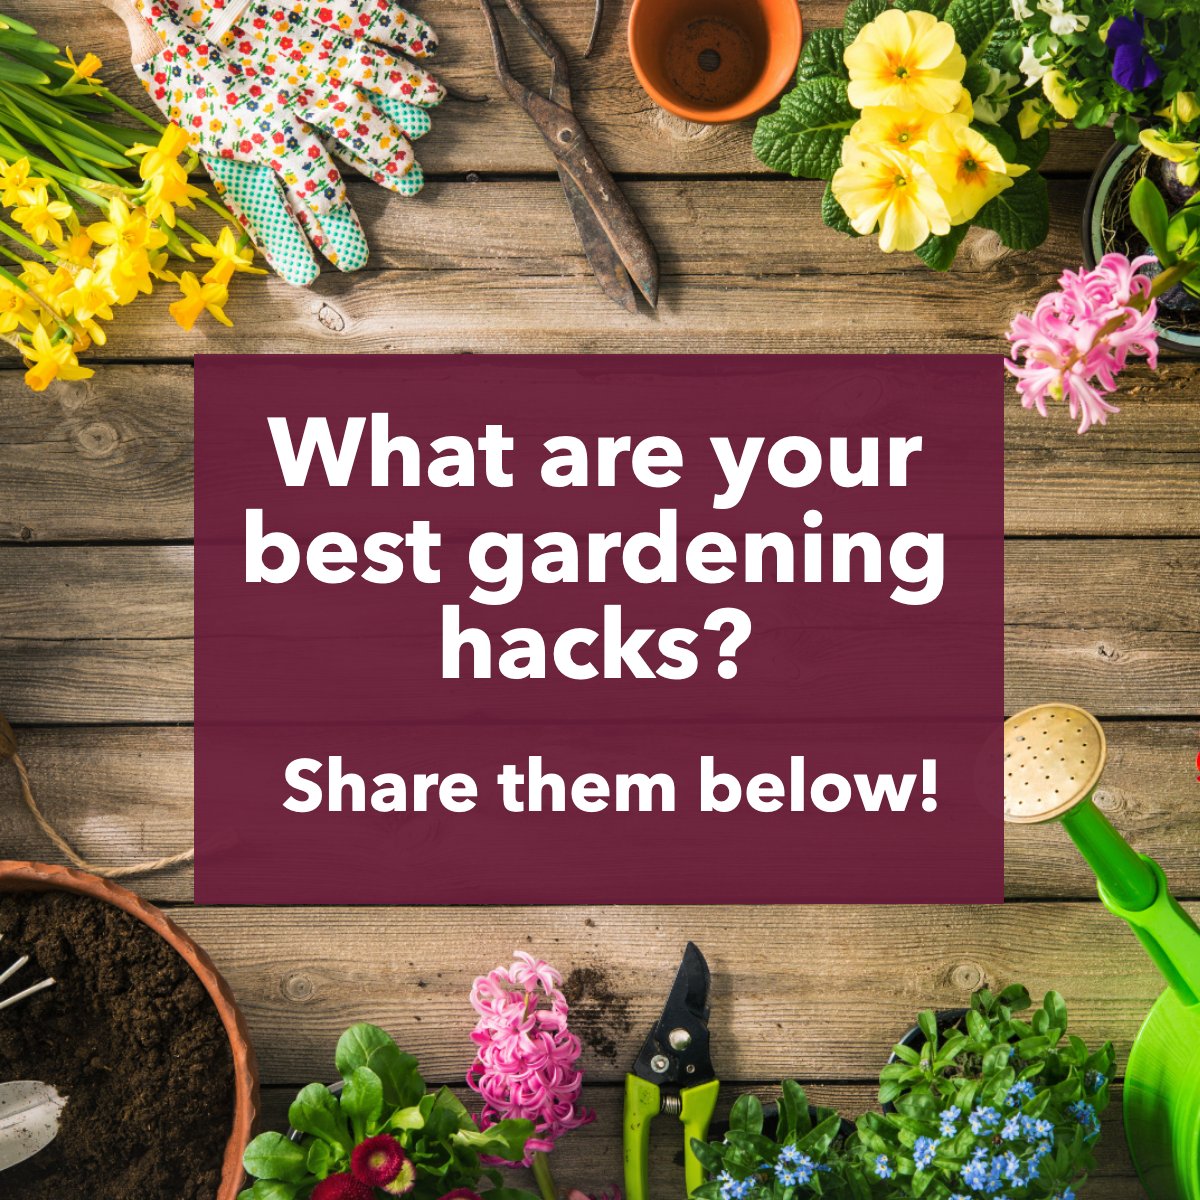 Share your best gardening tips with us. 🌻🌼

#gardeninglife    #gardeningideas    #gardeningtips    #homegardening    #GardeningHacks
#forsale #buyahouse #mortgageinformation #hicksville #westbury